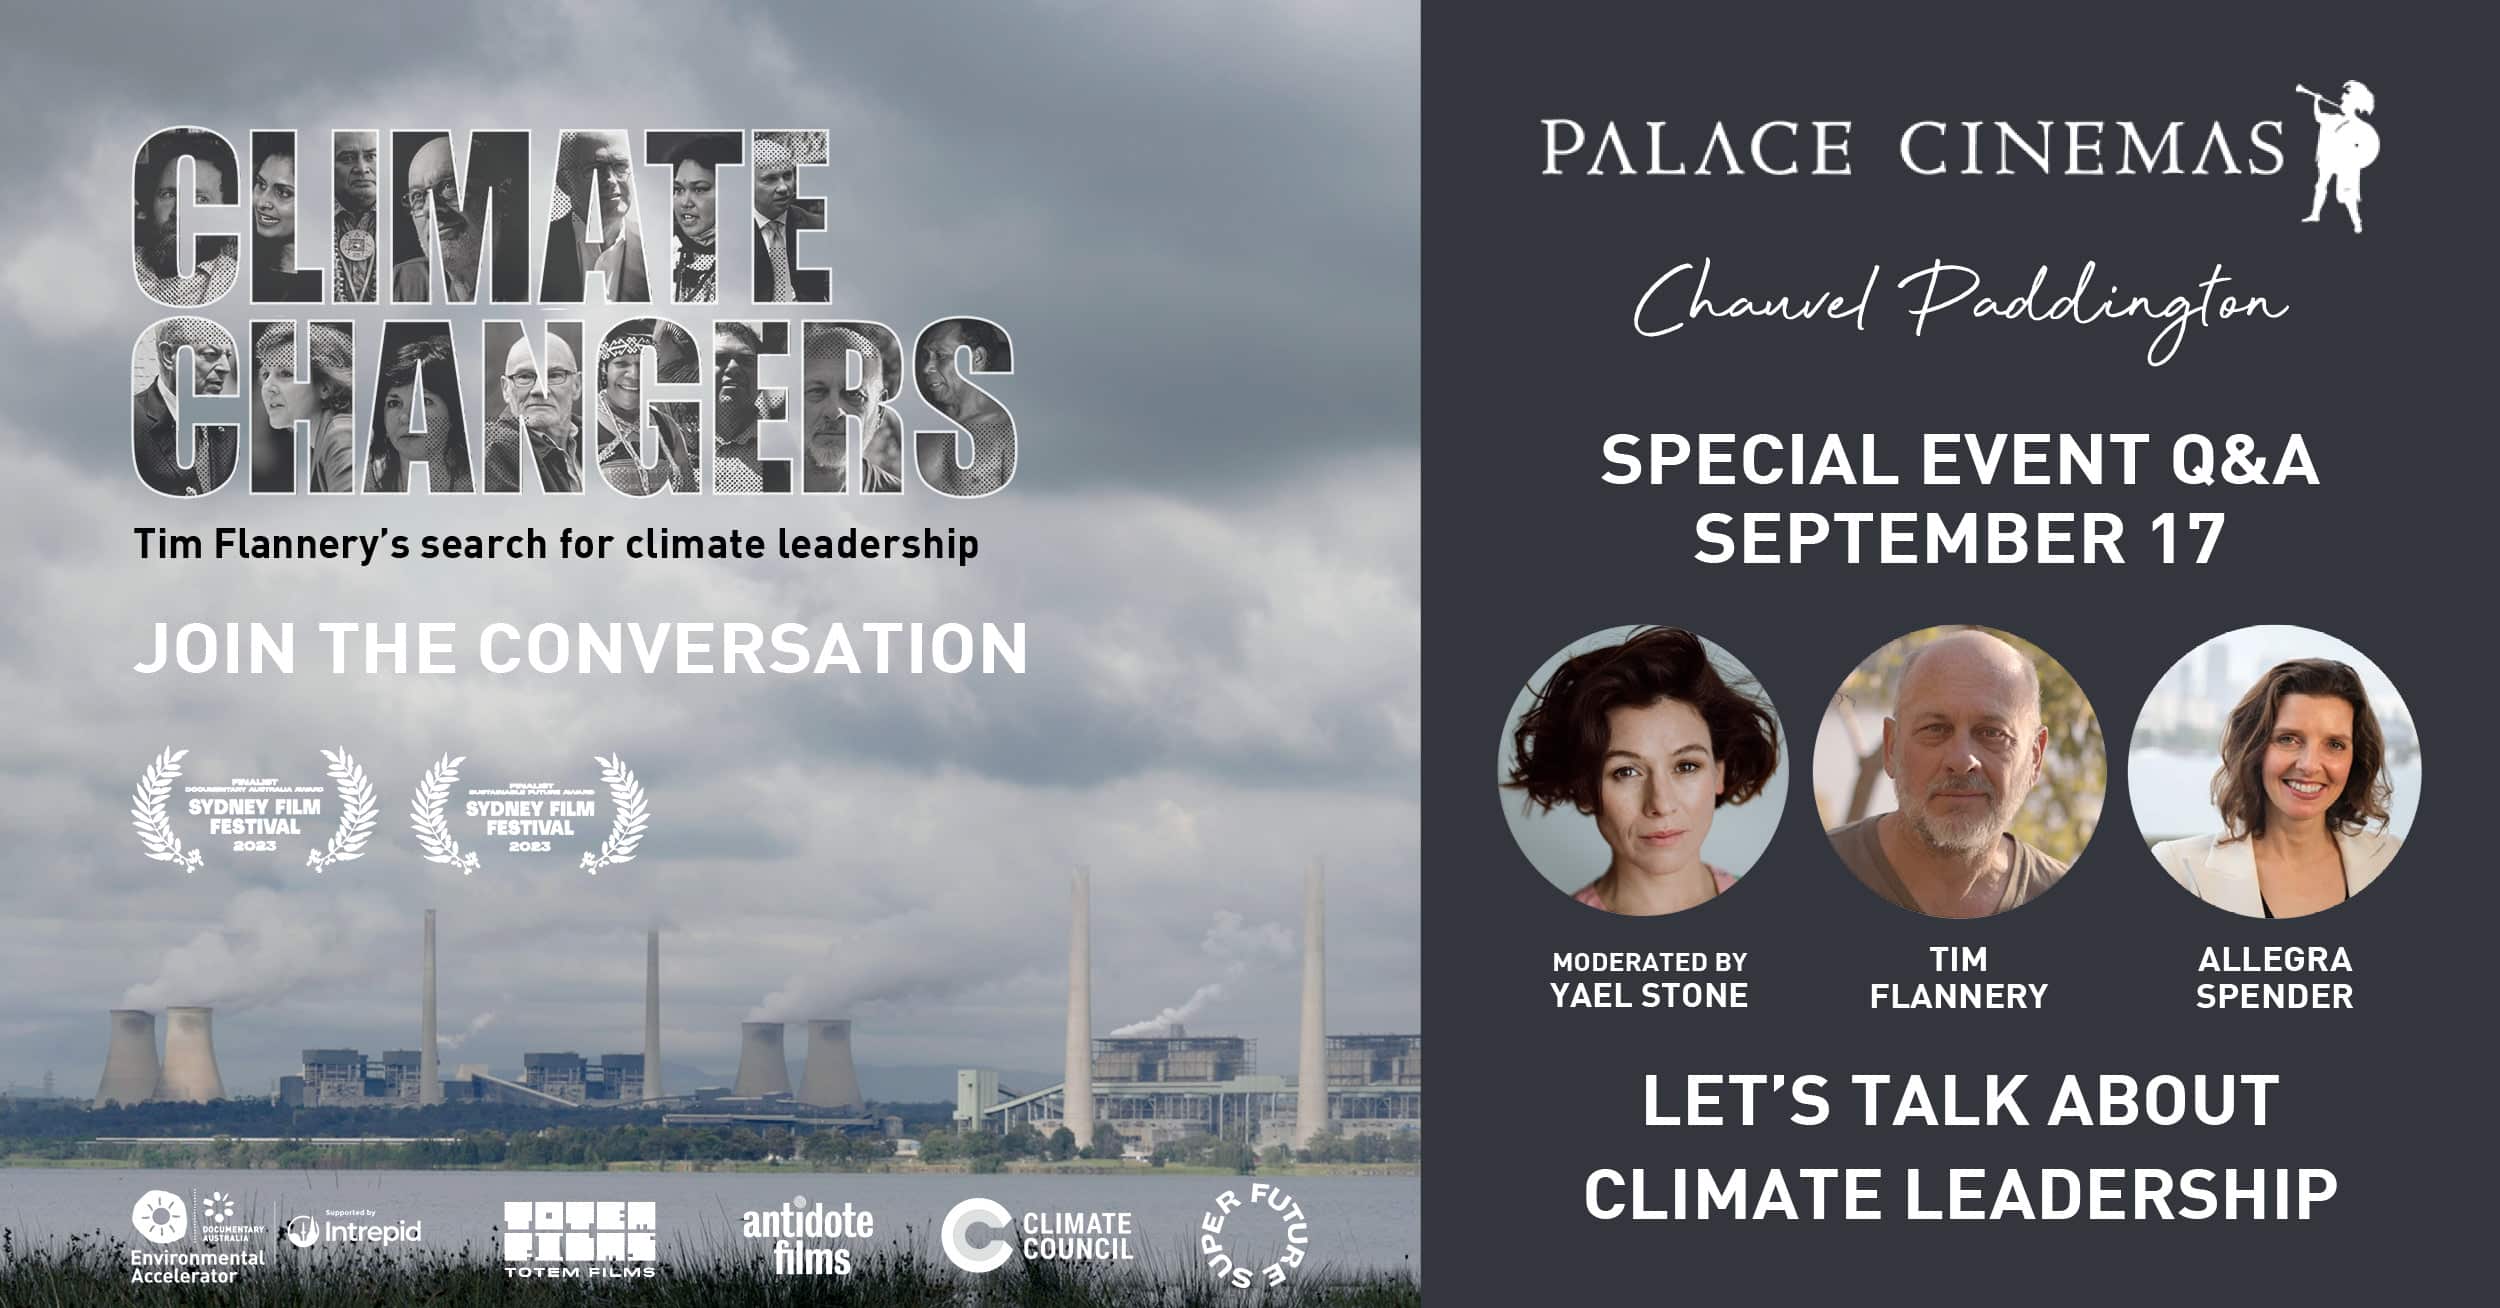 chauvel-climate-changers-special-event-allegra-spender